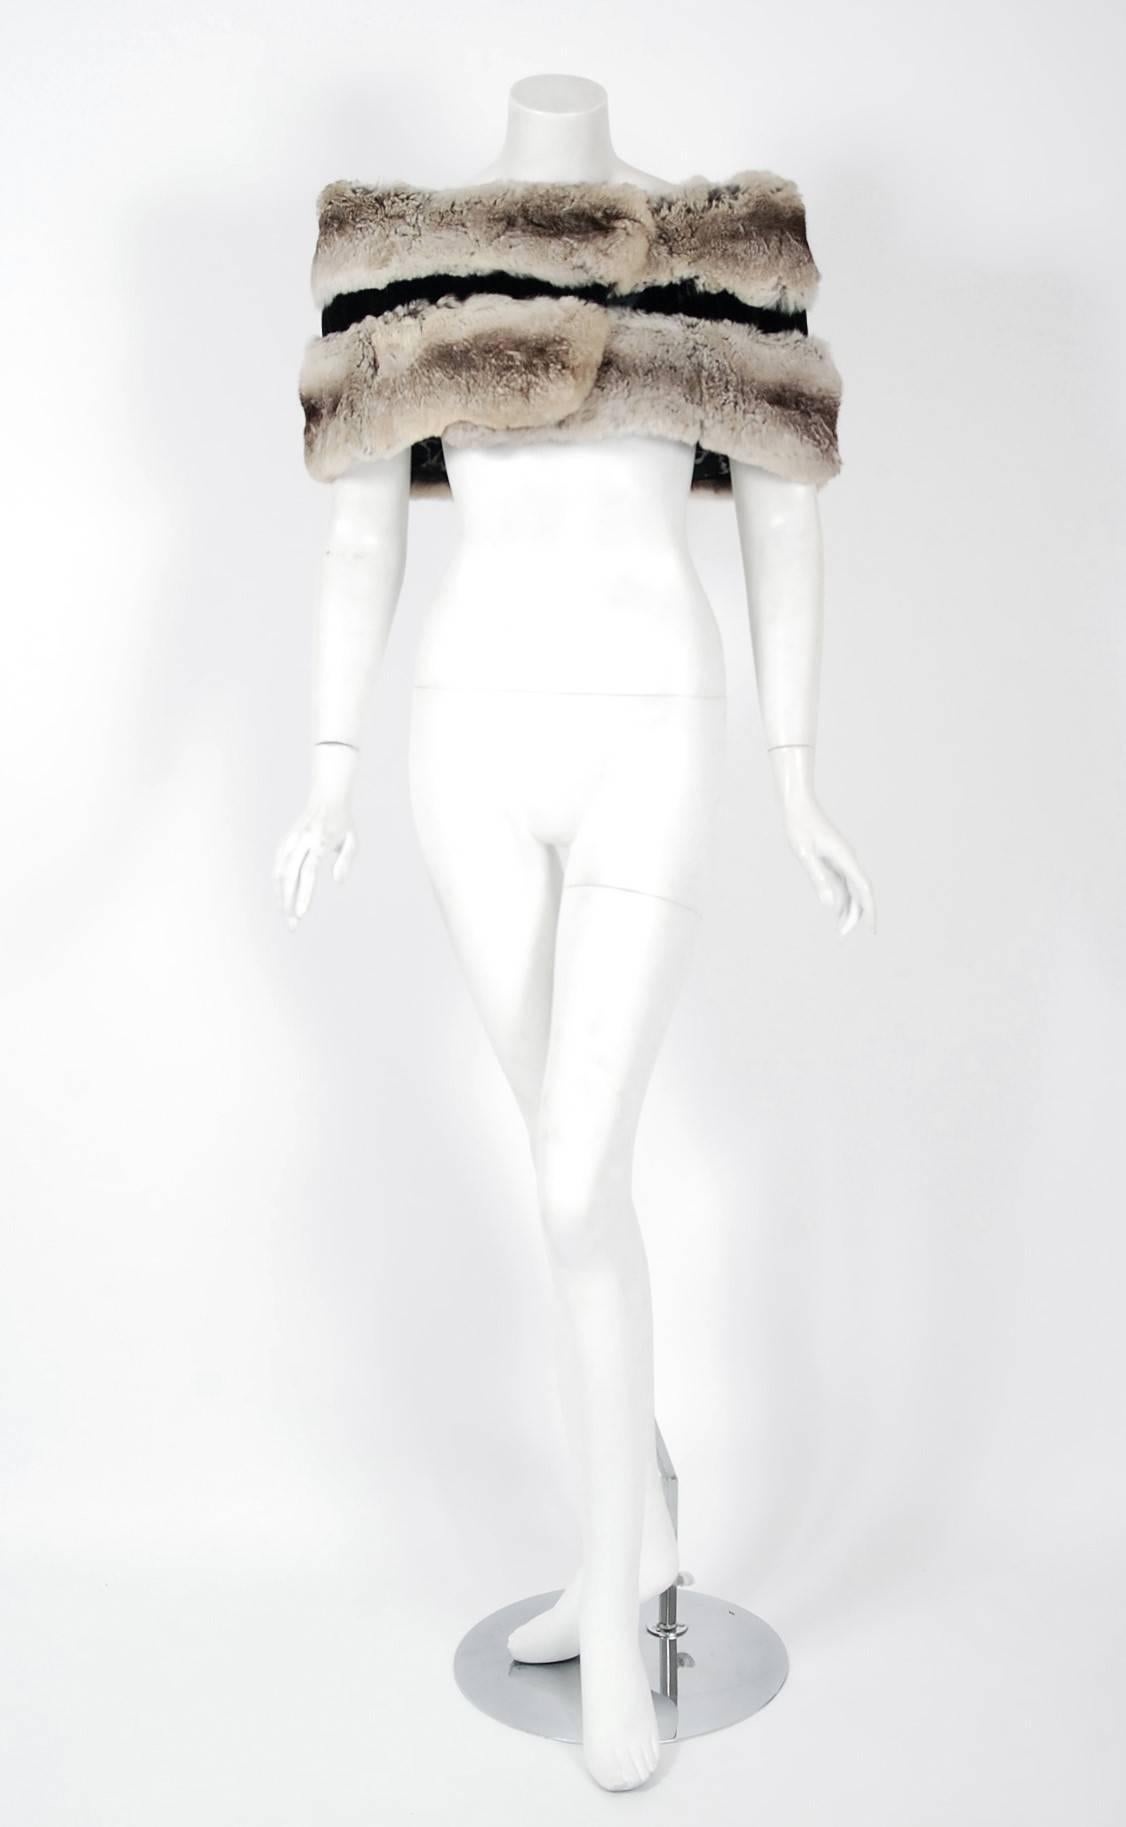 An extraordinary genuine chinchilla-fur and velvet stole from the Florida couture boutique "Rosengarten". It is easy to see the level of quality in this piece; the fur is extremely supple and soft. The garment is pieced together in